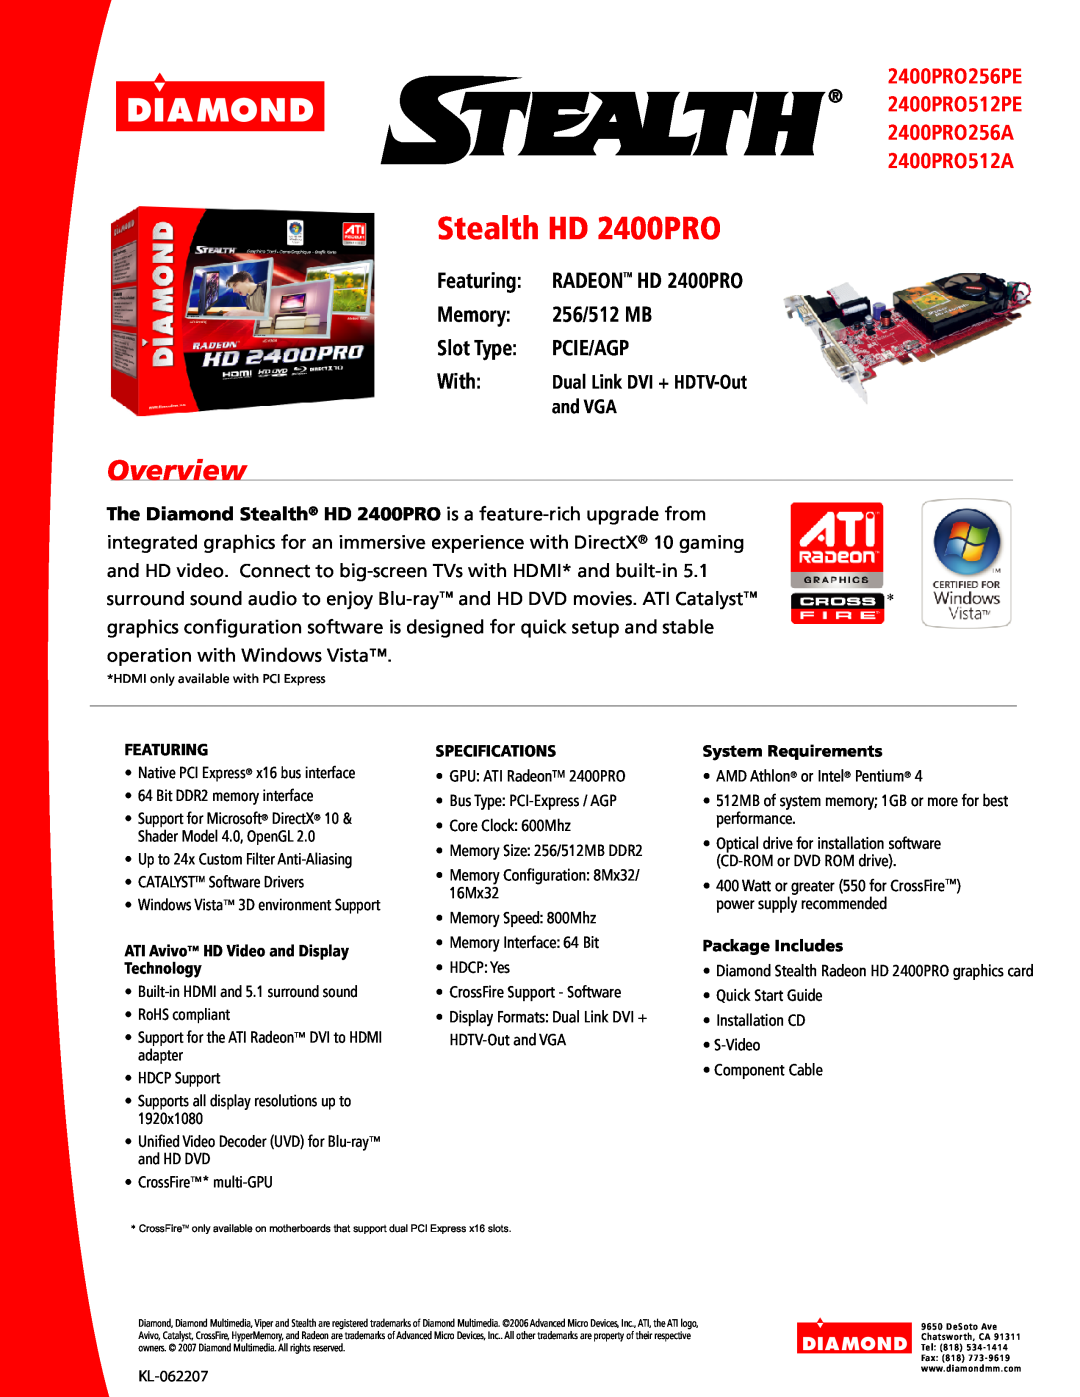 Diamond Multimedia 2400PRO512PE specifications Stealth HD 2400PRO, Overview, With Dual Link DVI + HDTV-Out and VGA 